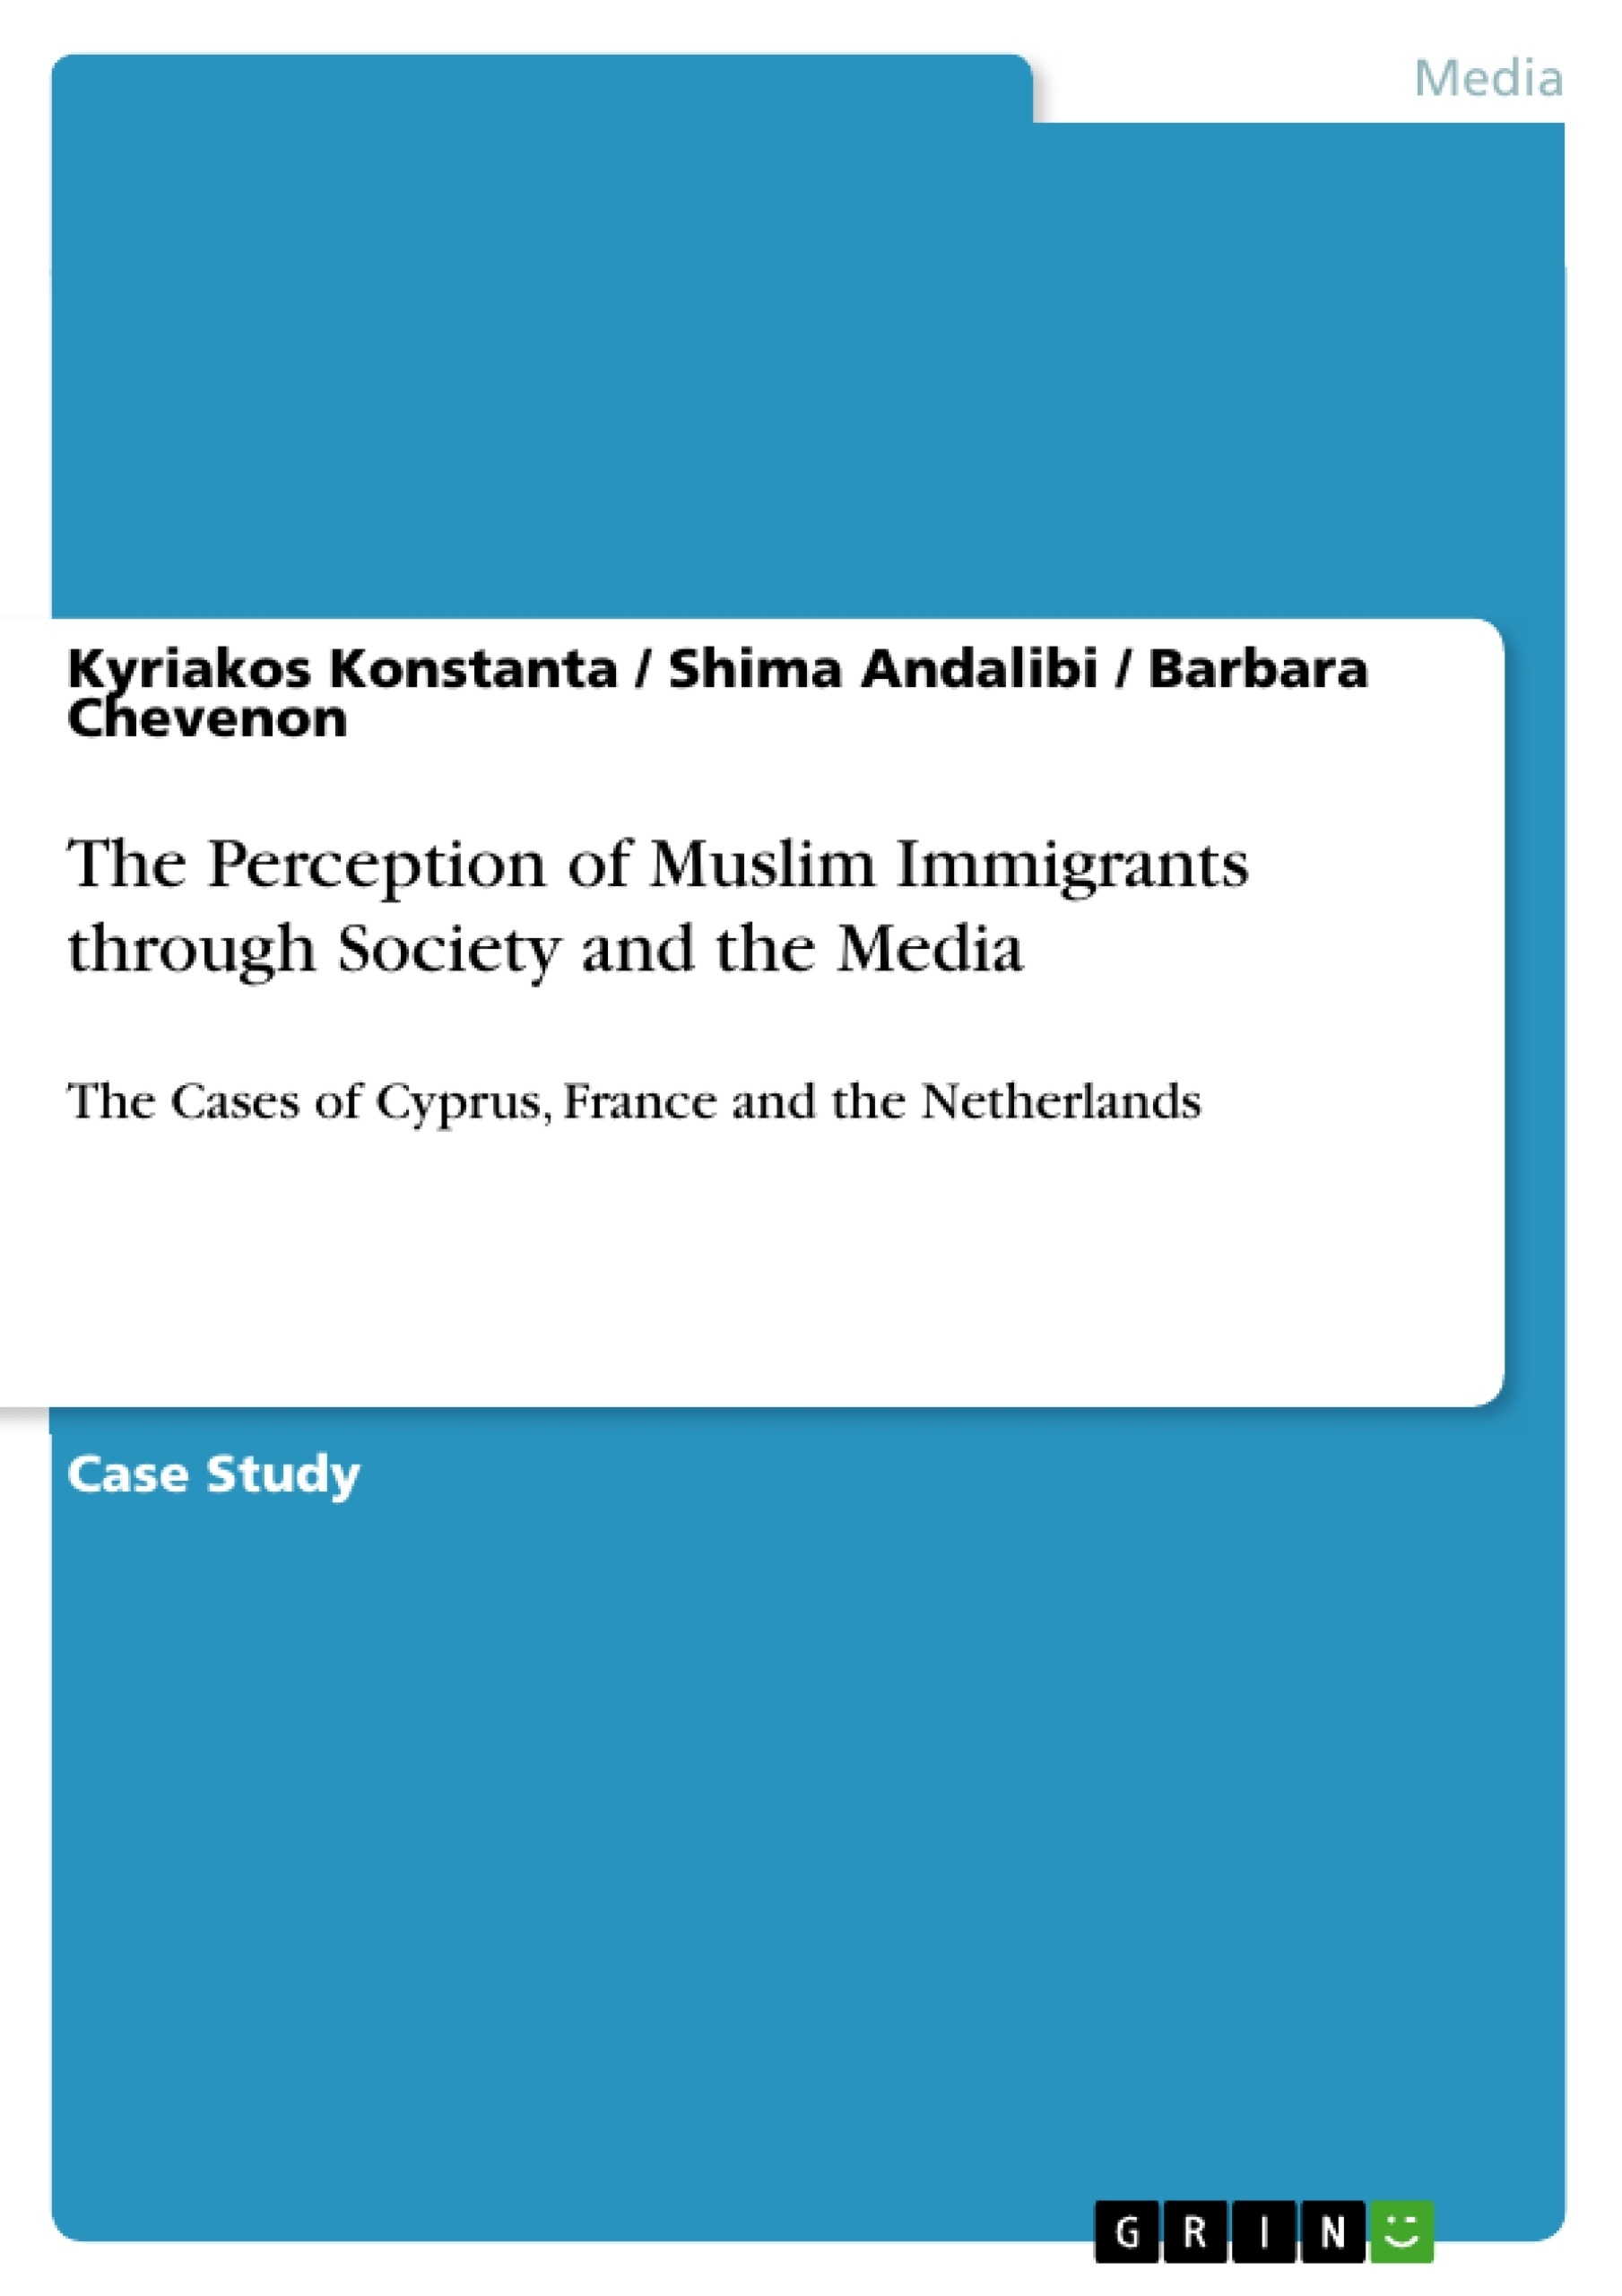 Titel: The Perception of Muslim Immigrants through Society and the Media